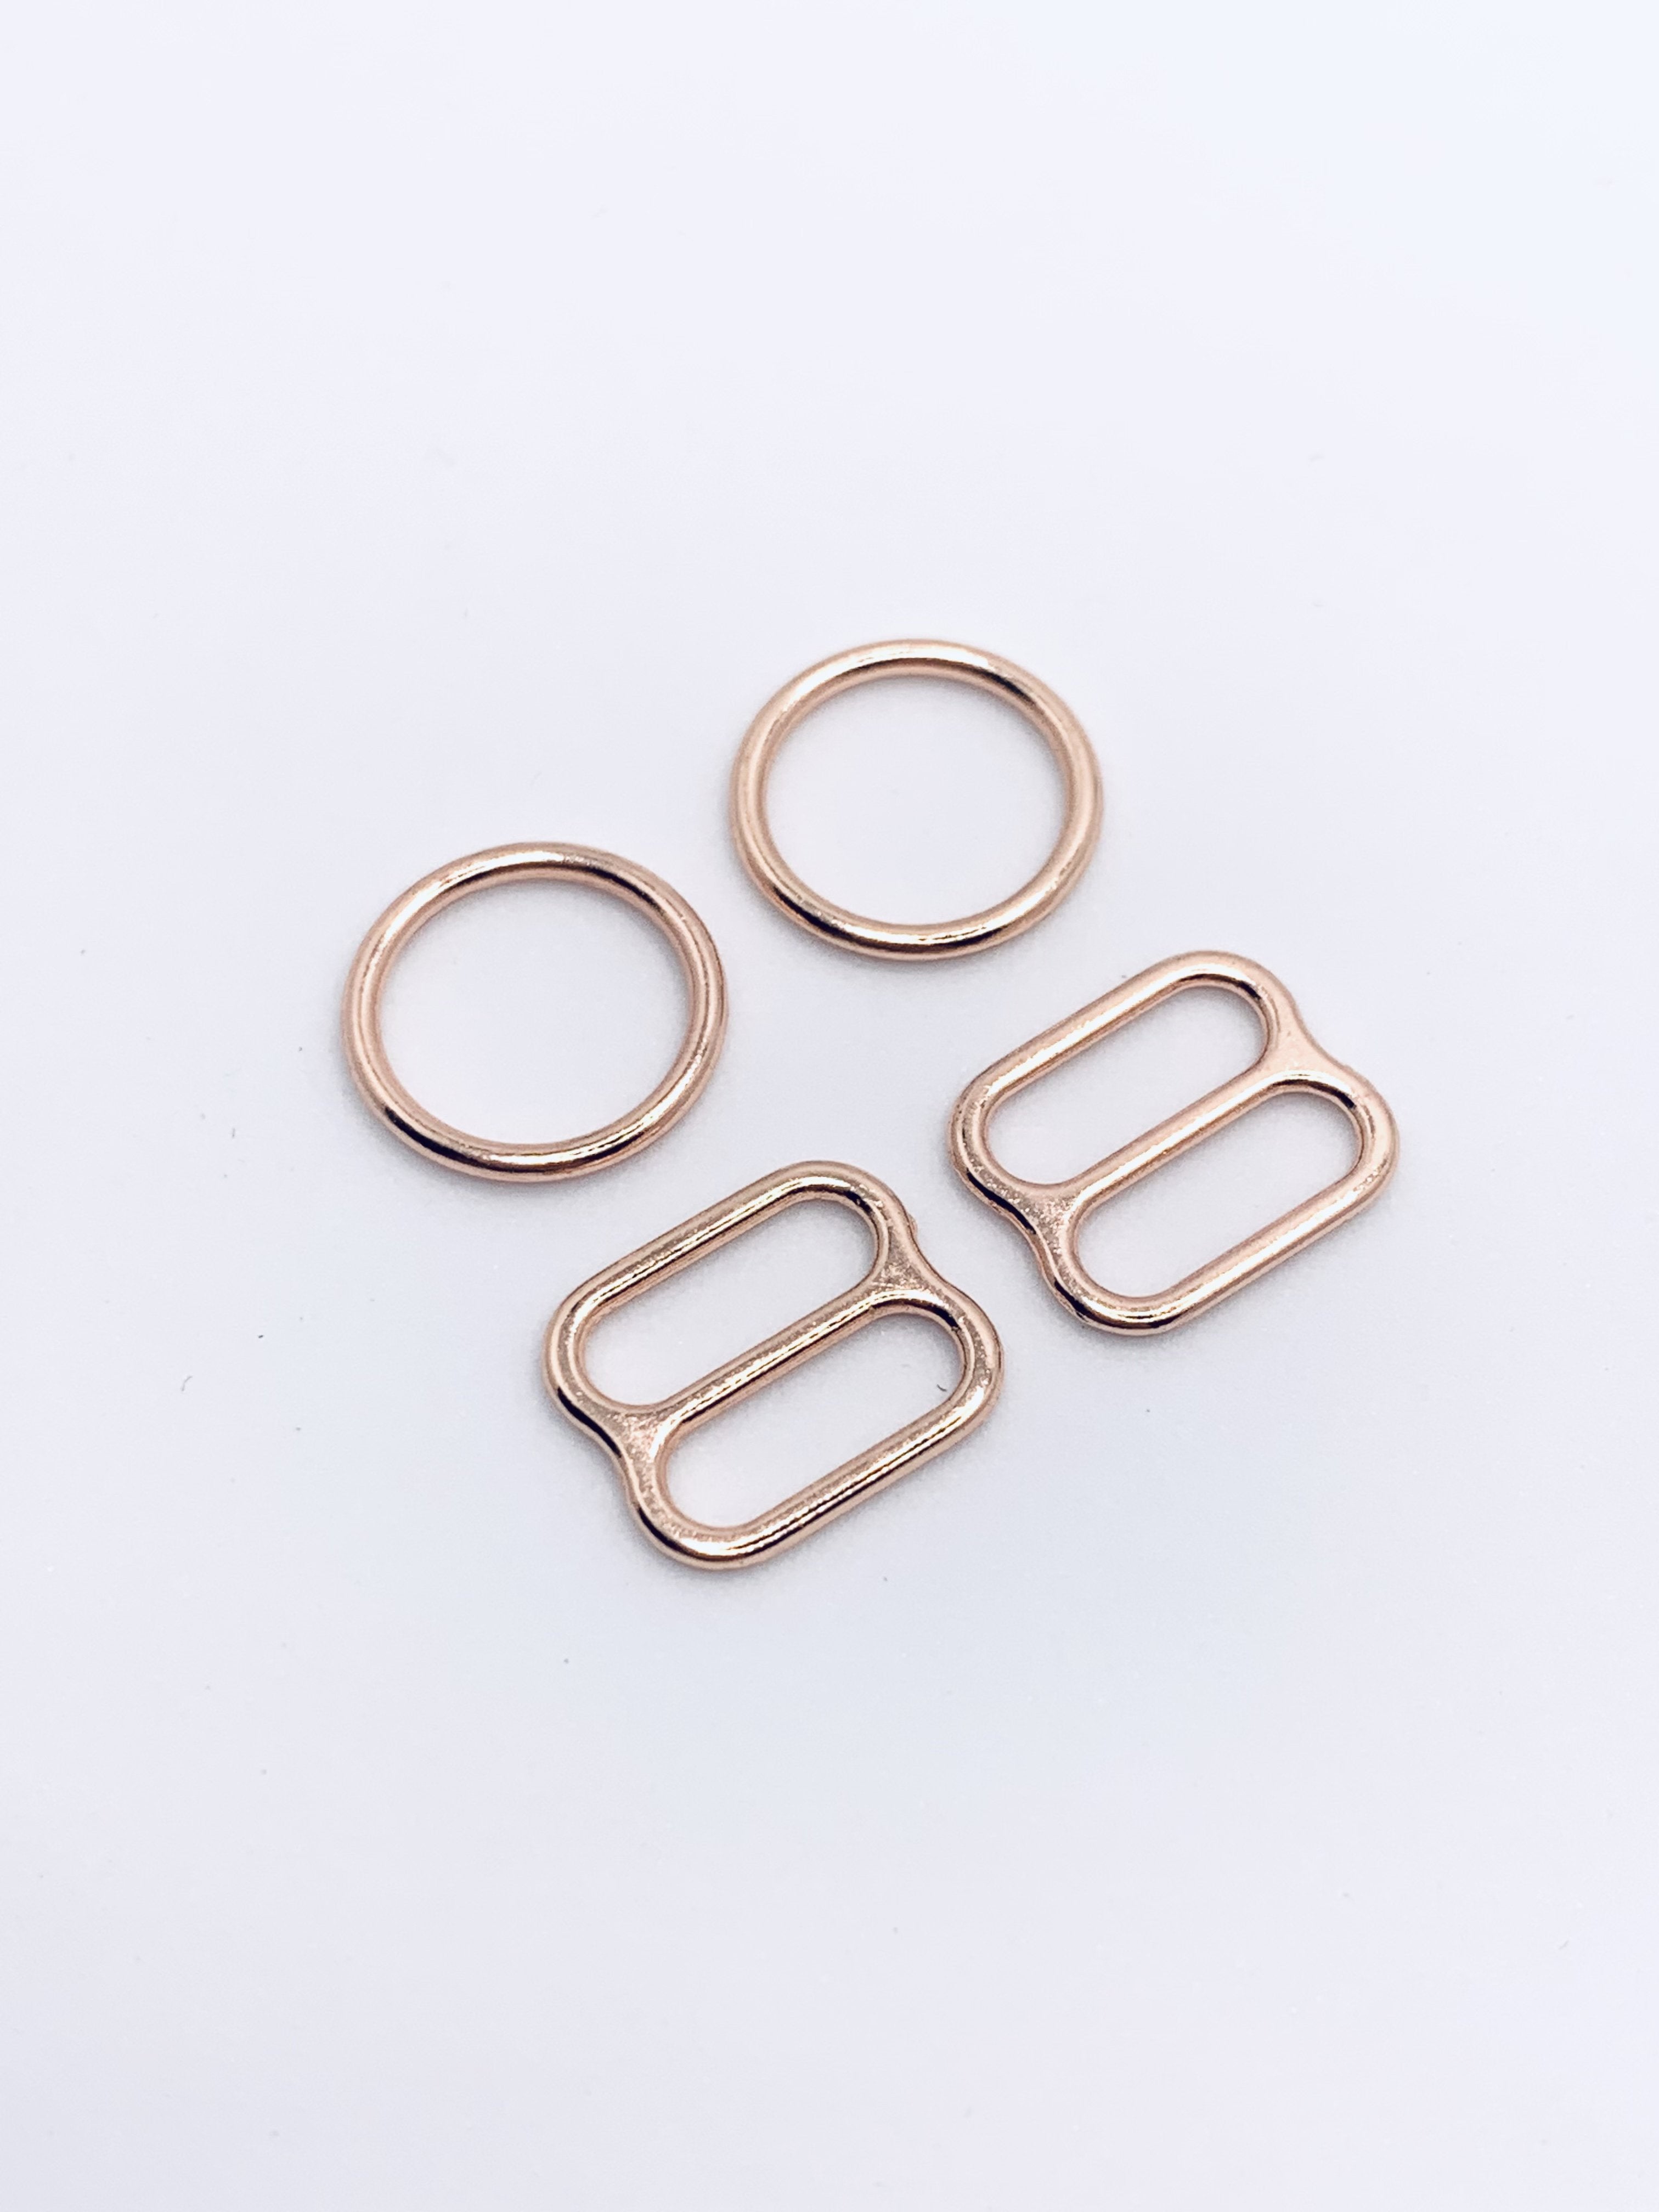 Wholesale 8mm gold bra slider For All Your Intimate Needs